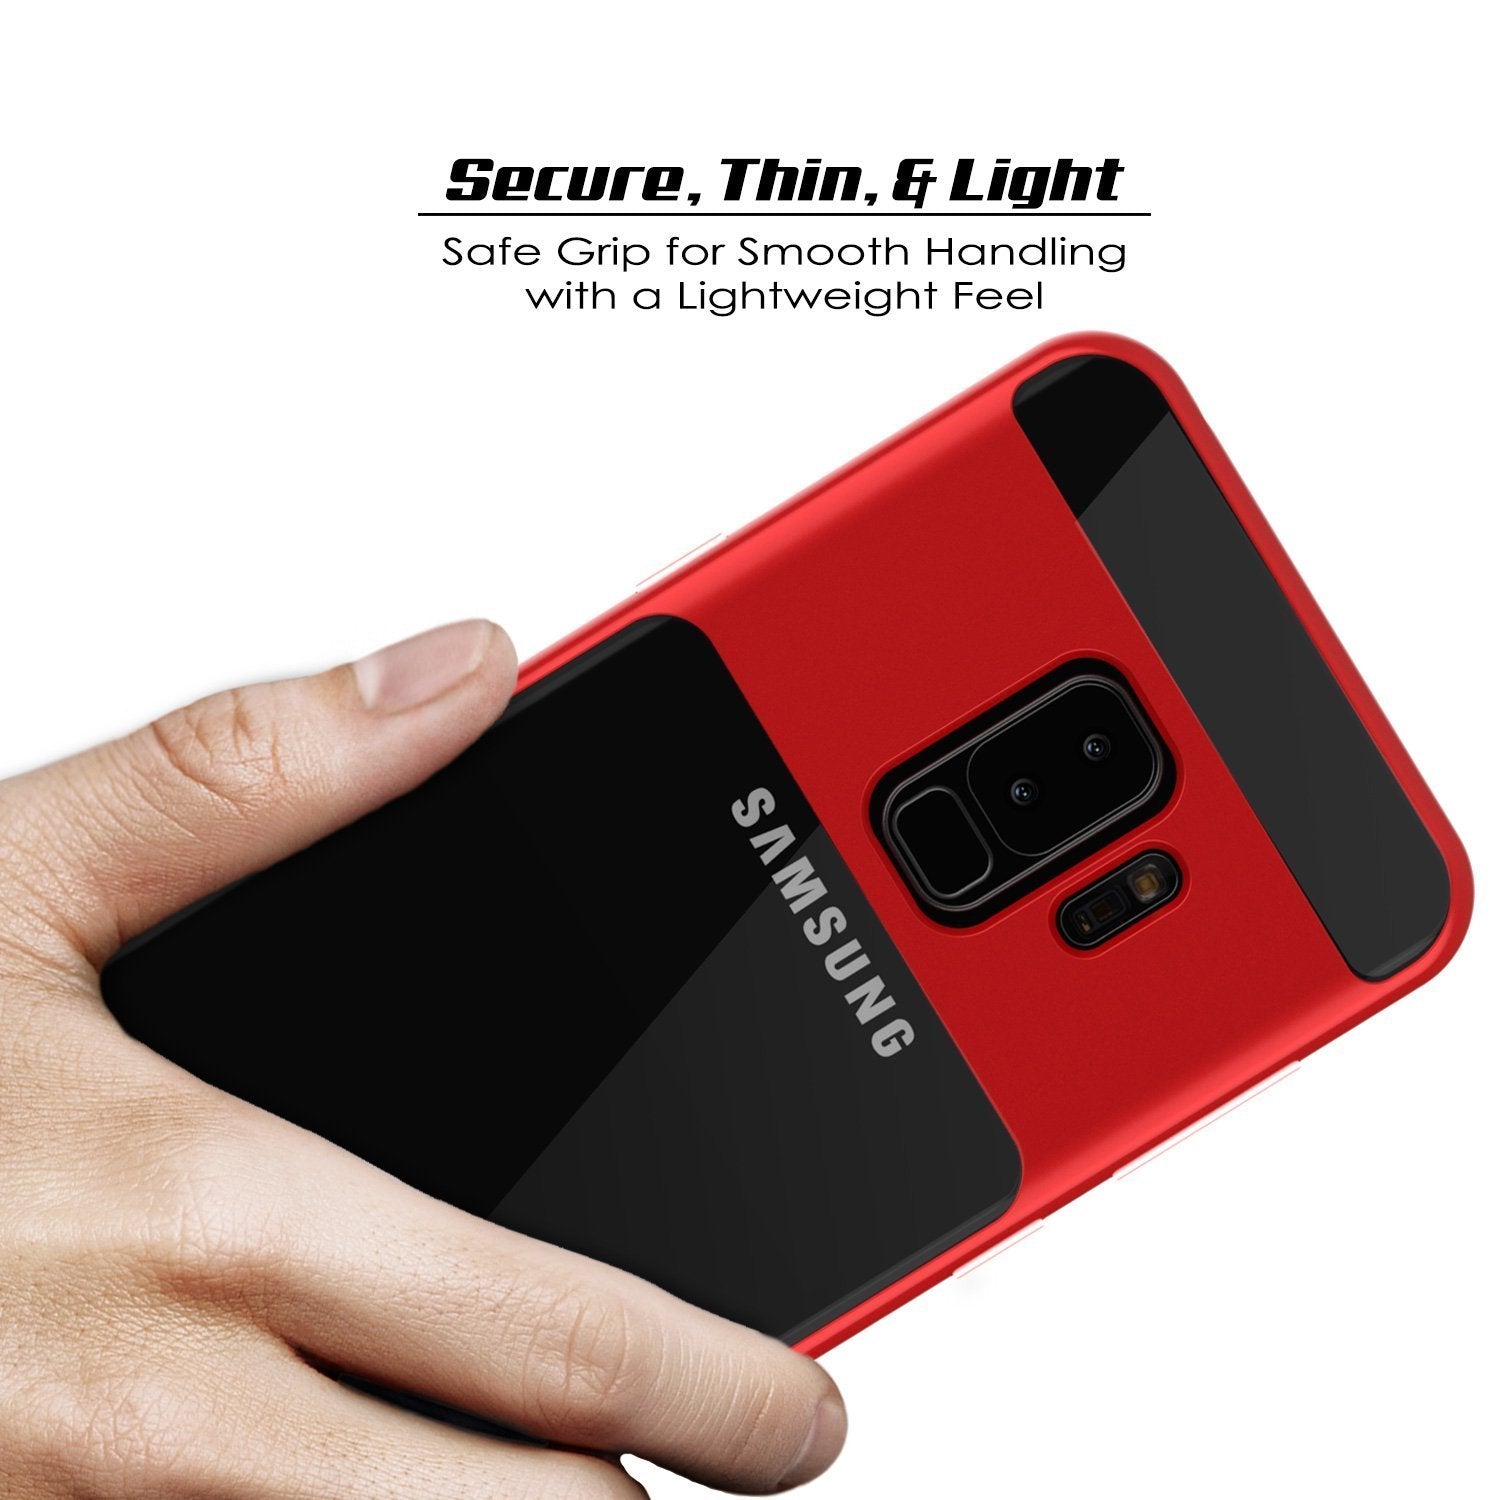 Galaxy S9+ Plus Case, PUNKcase [LUCID 3.0 Series] [Slim Fit] [Clear Back] Armor Cover w/ Integrated Kickstand, Anti-Shock System & PUNKSHIELD Screen Protector for Samsung Galaxy S9+ Plus [Red] - PunkCase NZ